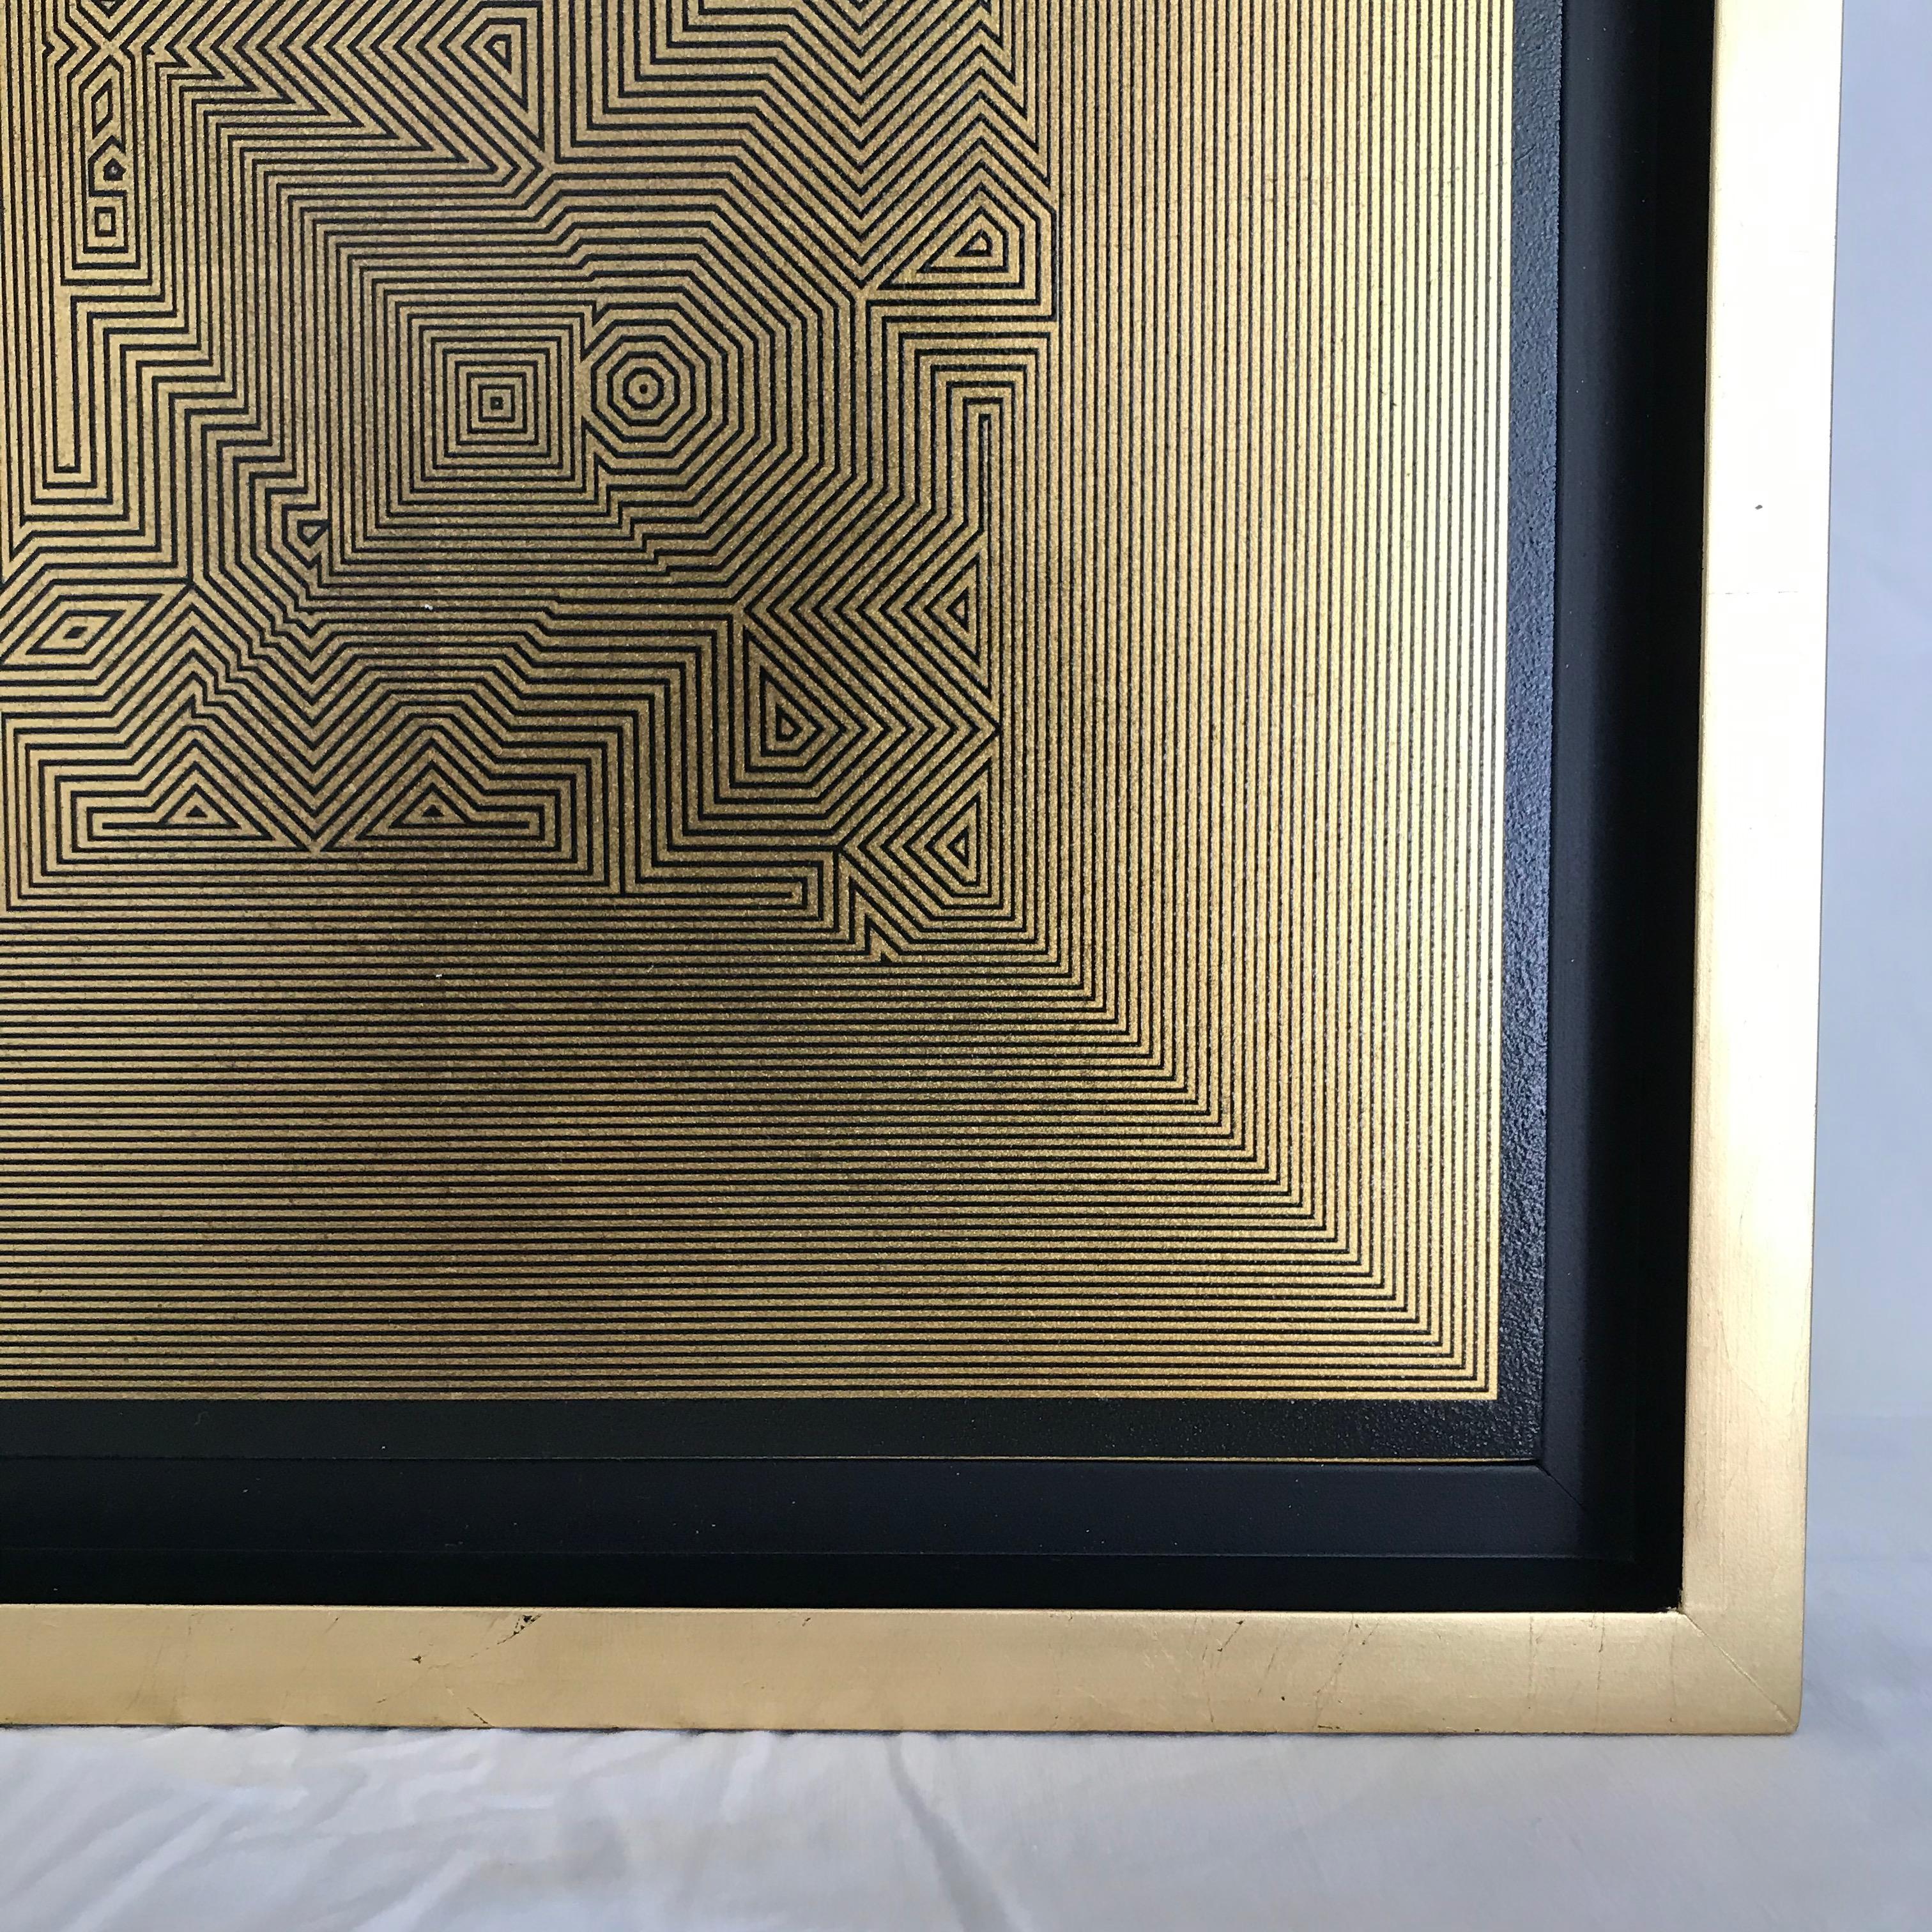 Untitled 18, 2019 by Francisco Larios
Lacquer, Acrylic, oil, and gold leaf on MDF Deep
Image Size: 9.5 in. H x 9.5 in. W
Frame Size: 11.6 in. H x 11.6 in. W x 1.5 in. D
One of a kind.
 
 From the  Mexican Ryōan-ji Series.
Ryōan-ji is the Japanese